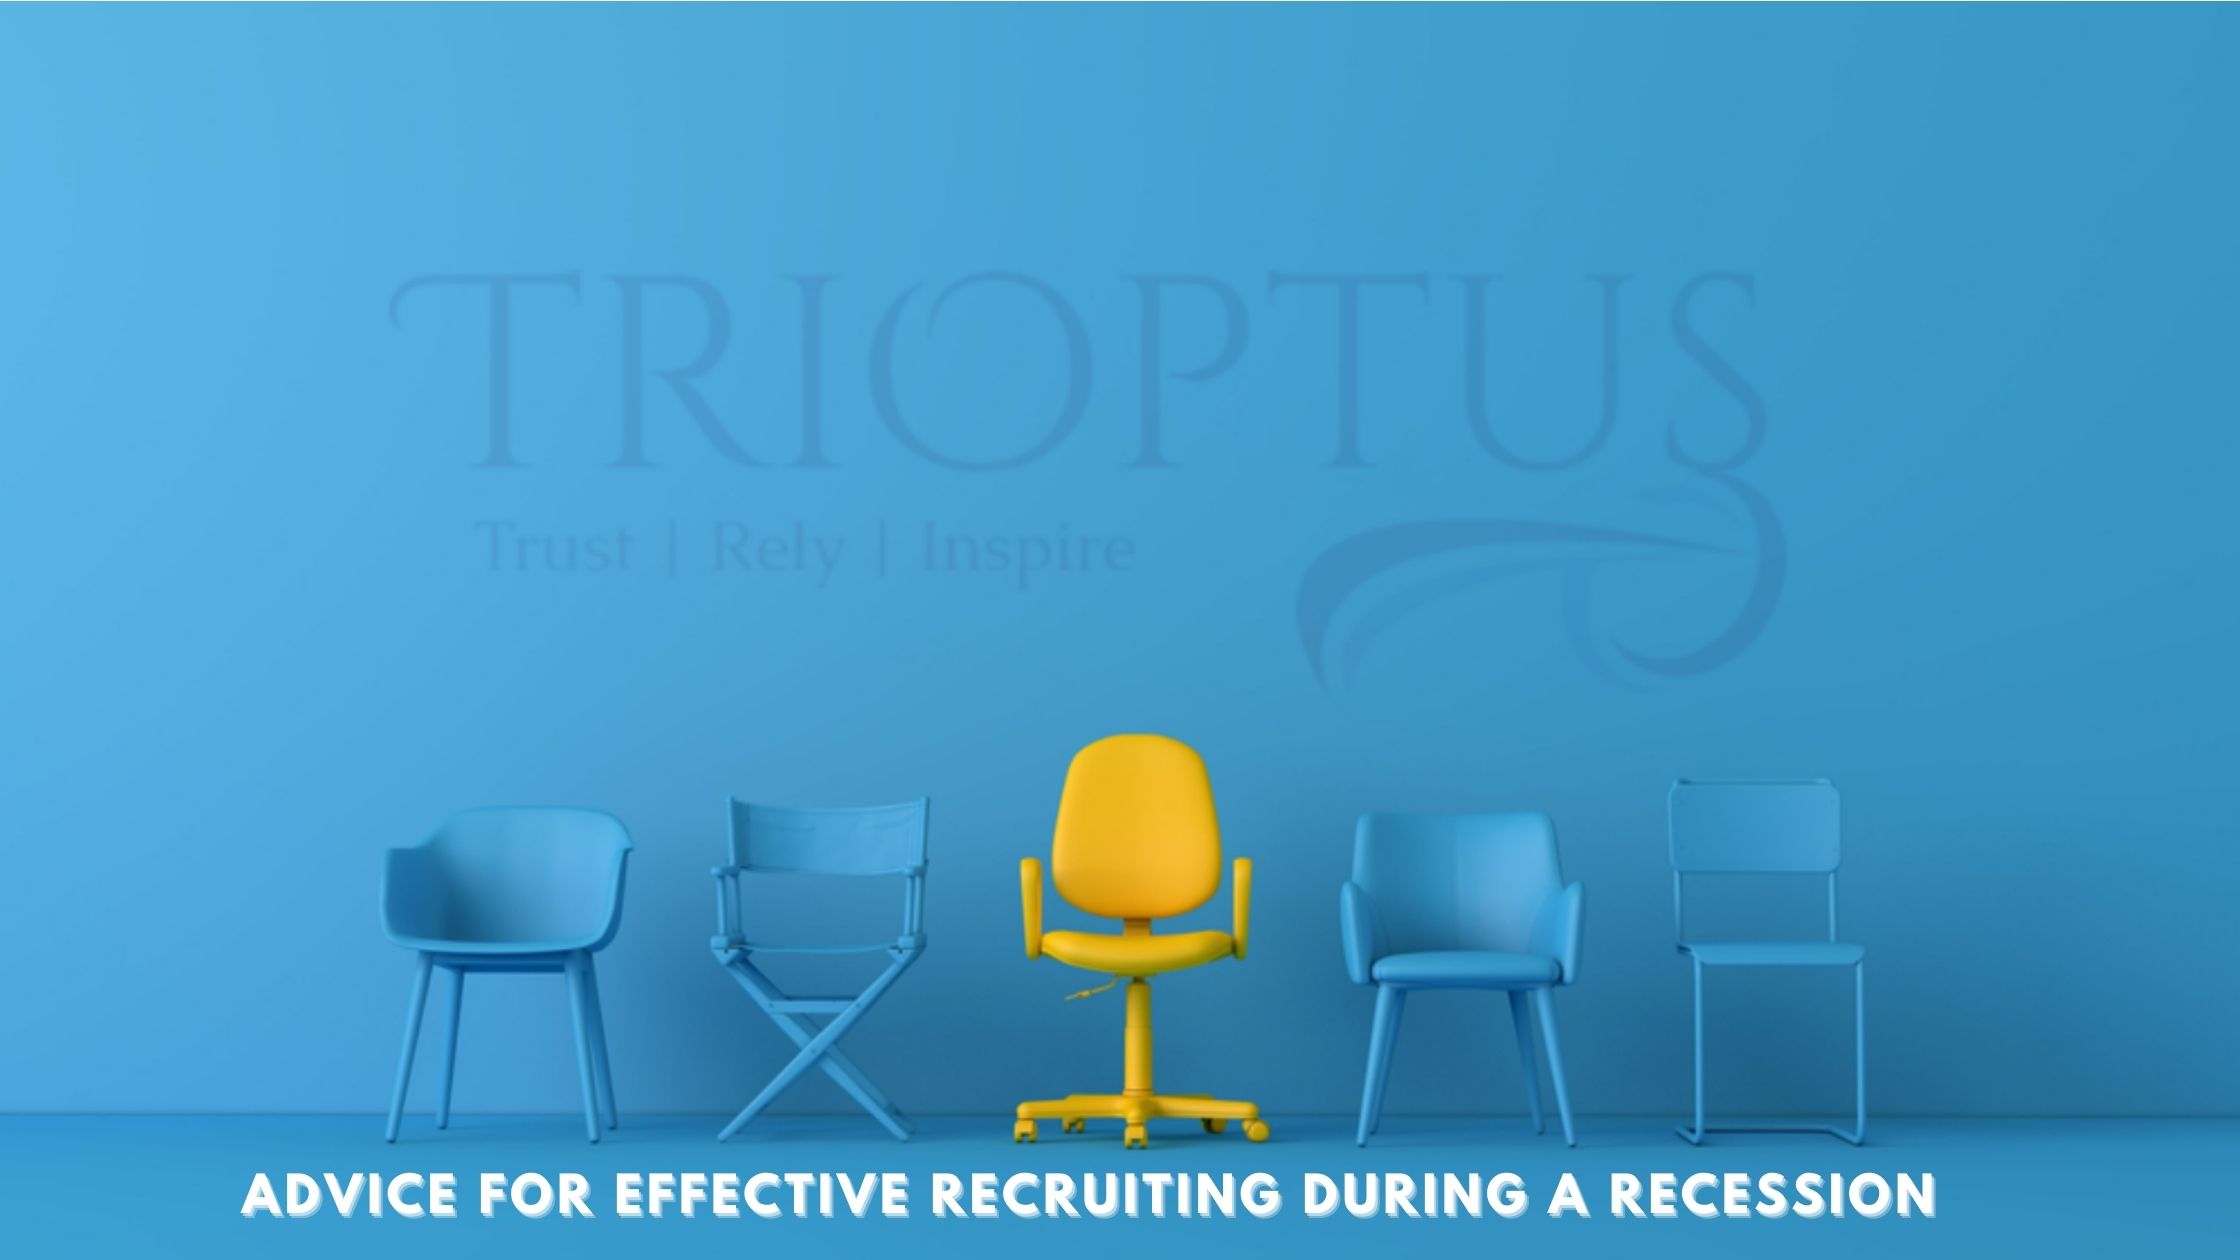 Advice for Effective Recruiting During a Recession - RPO